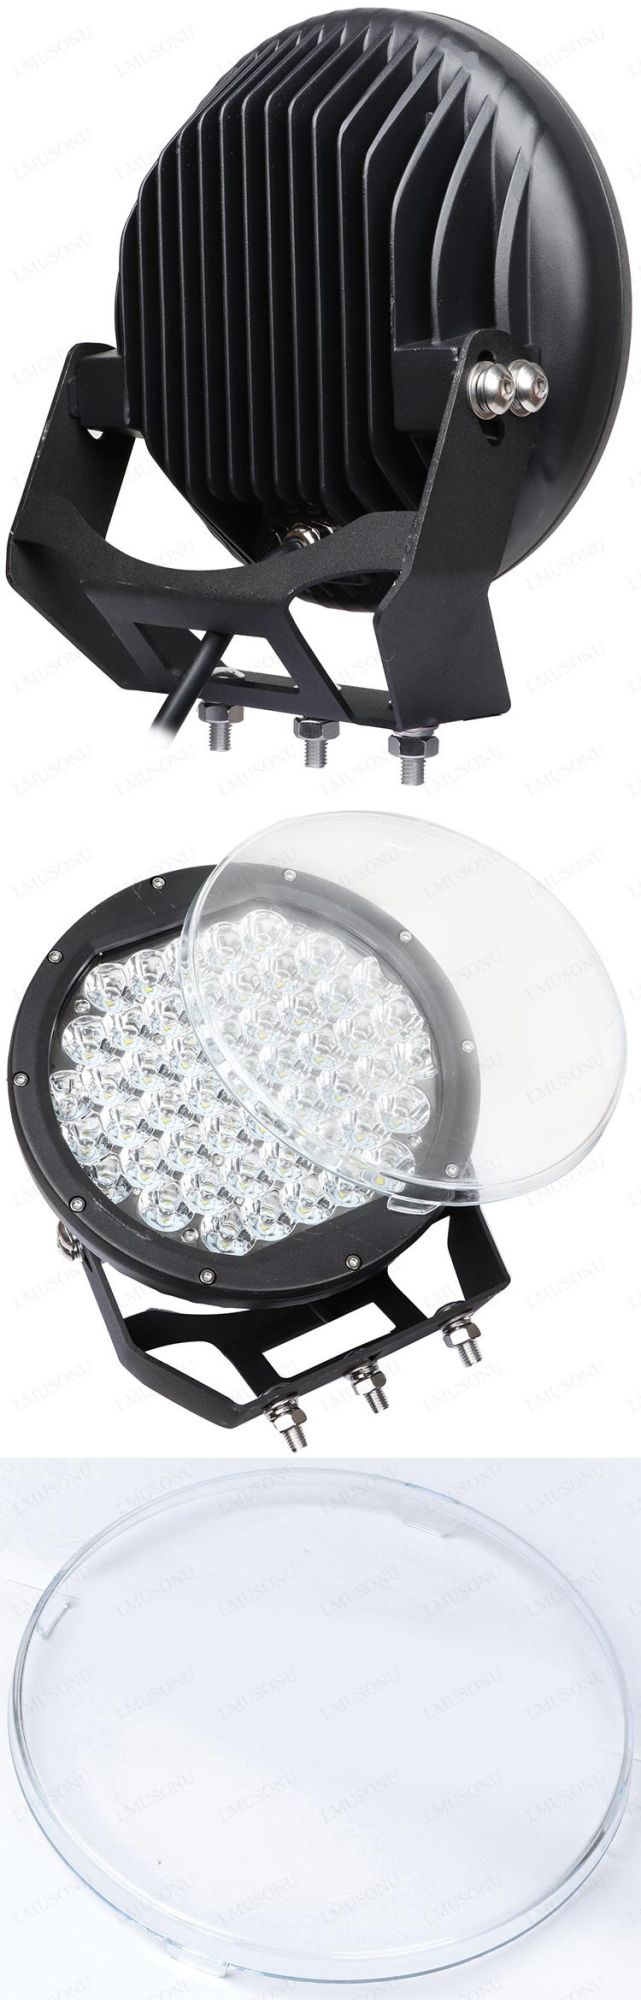 10.0 Inch 255W 4X4 Offroad Car Auxiliary LED Work Driving Light Spot Flood Beam